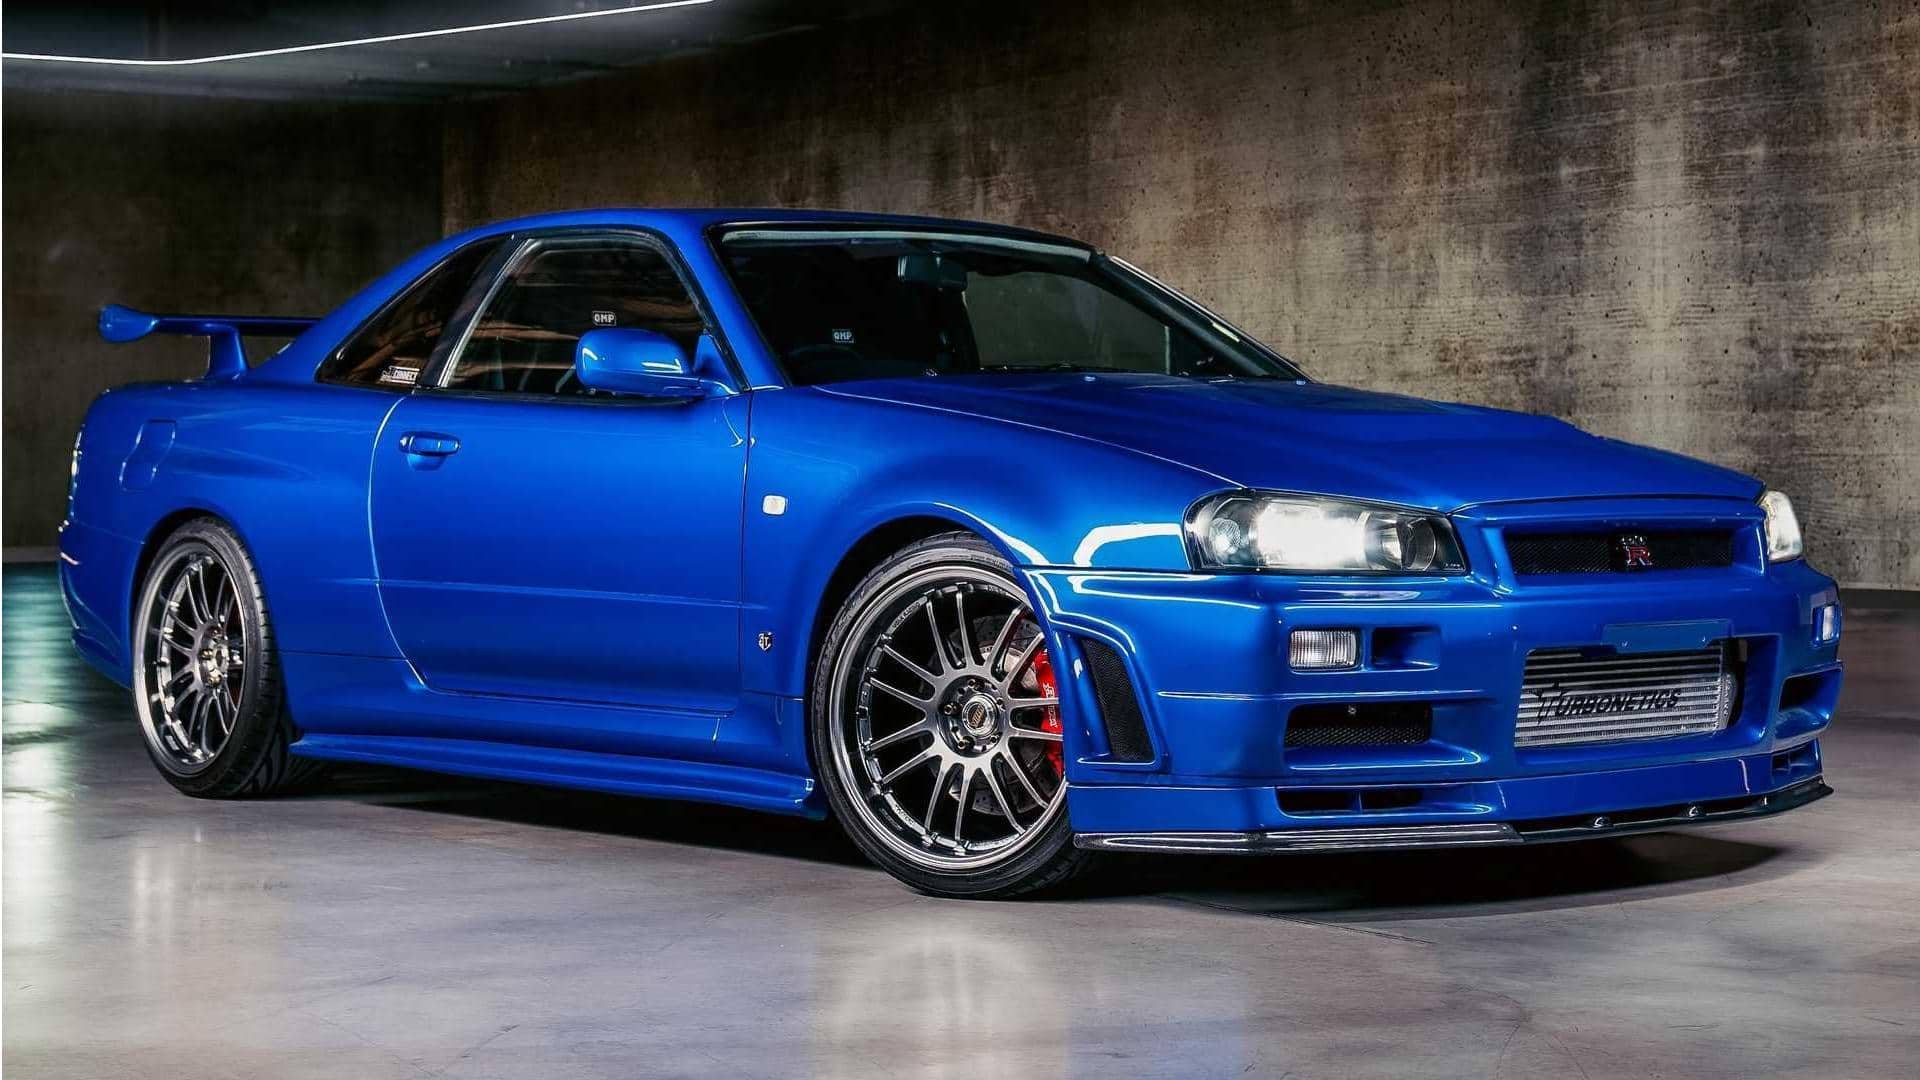 Paul Walker's Nissan Skyline R34 GT-R is up for auction